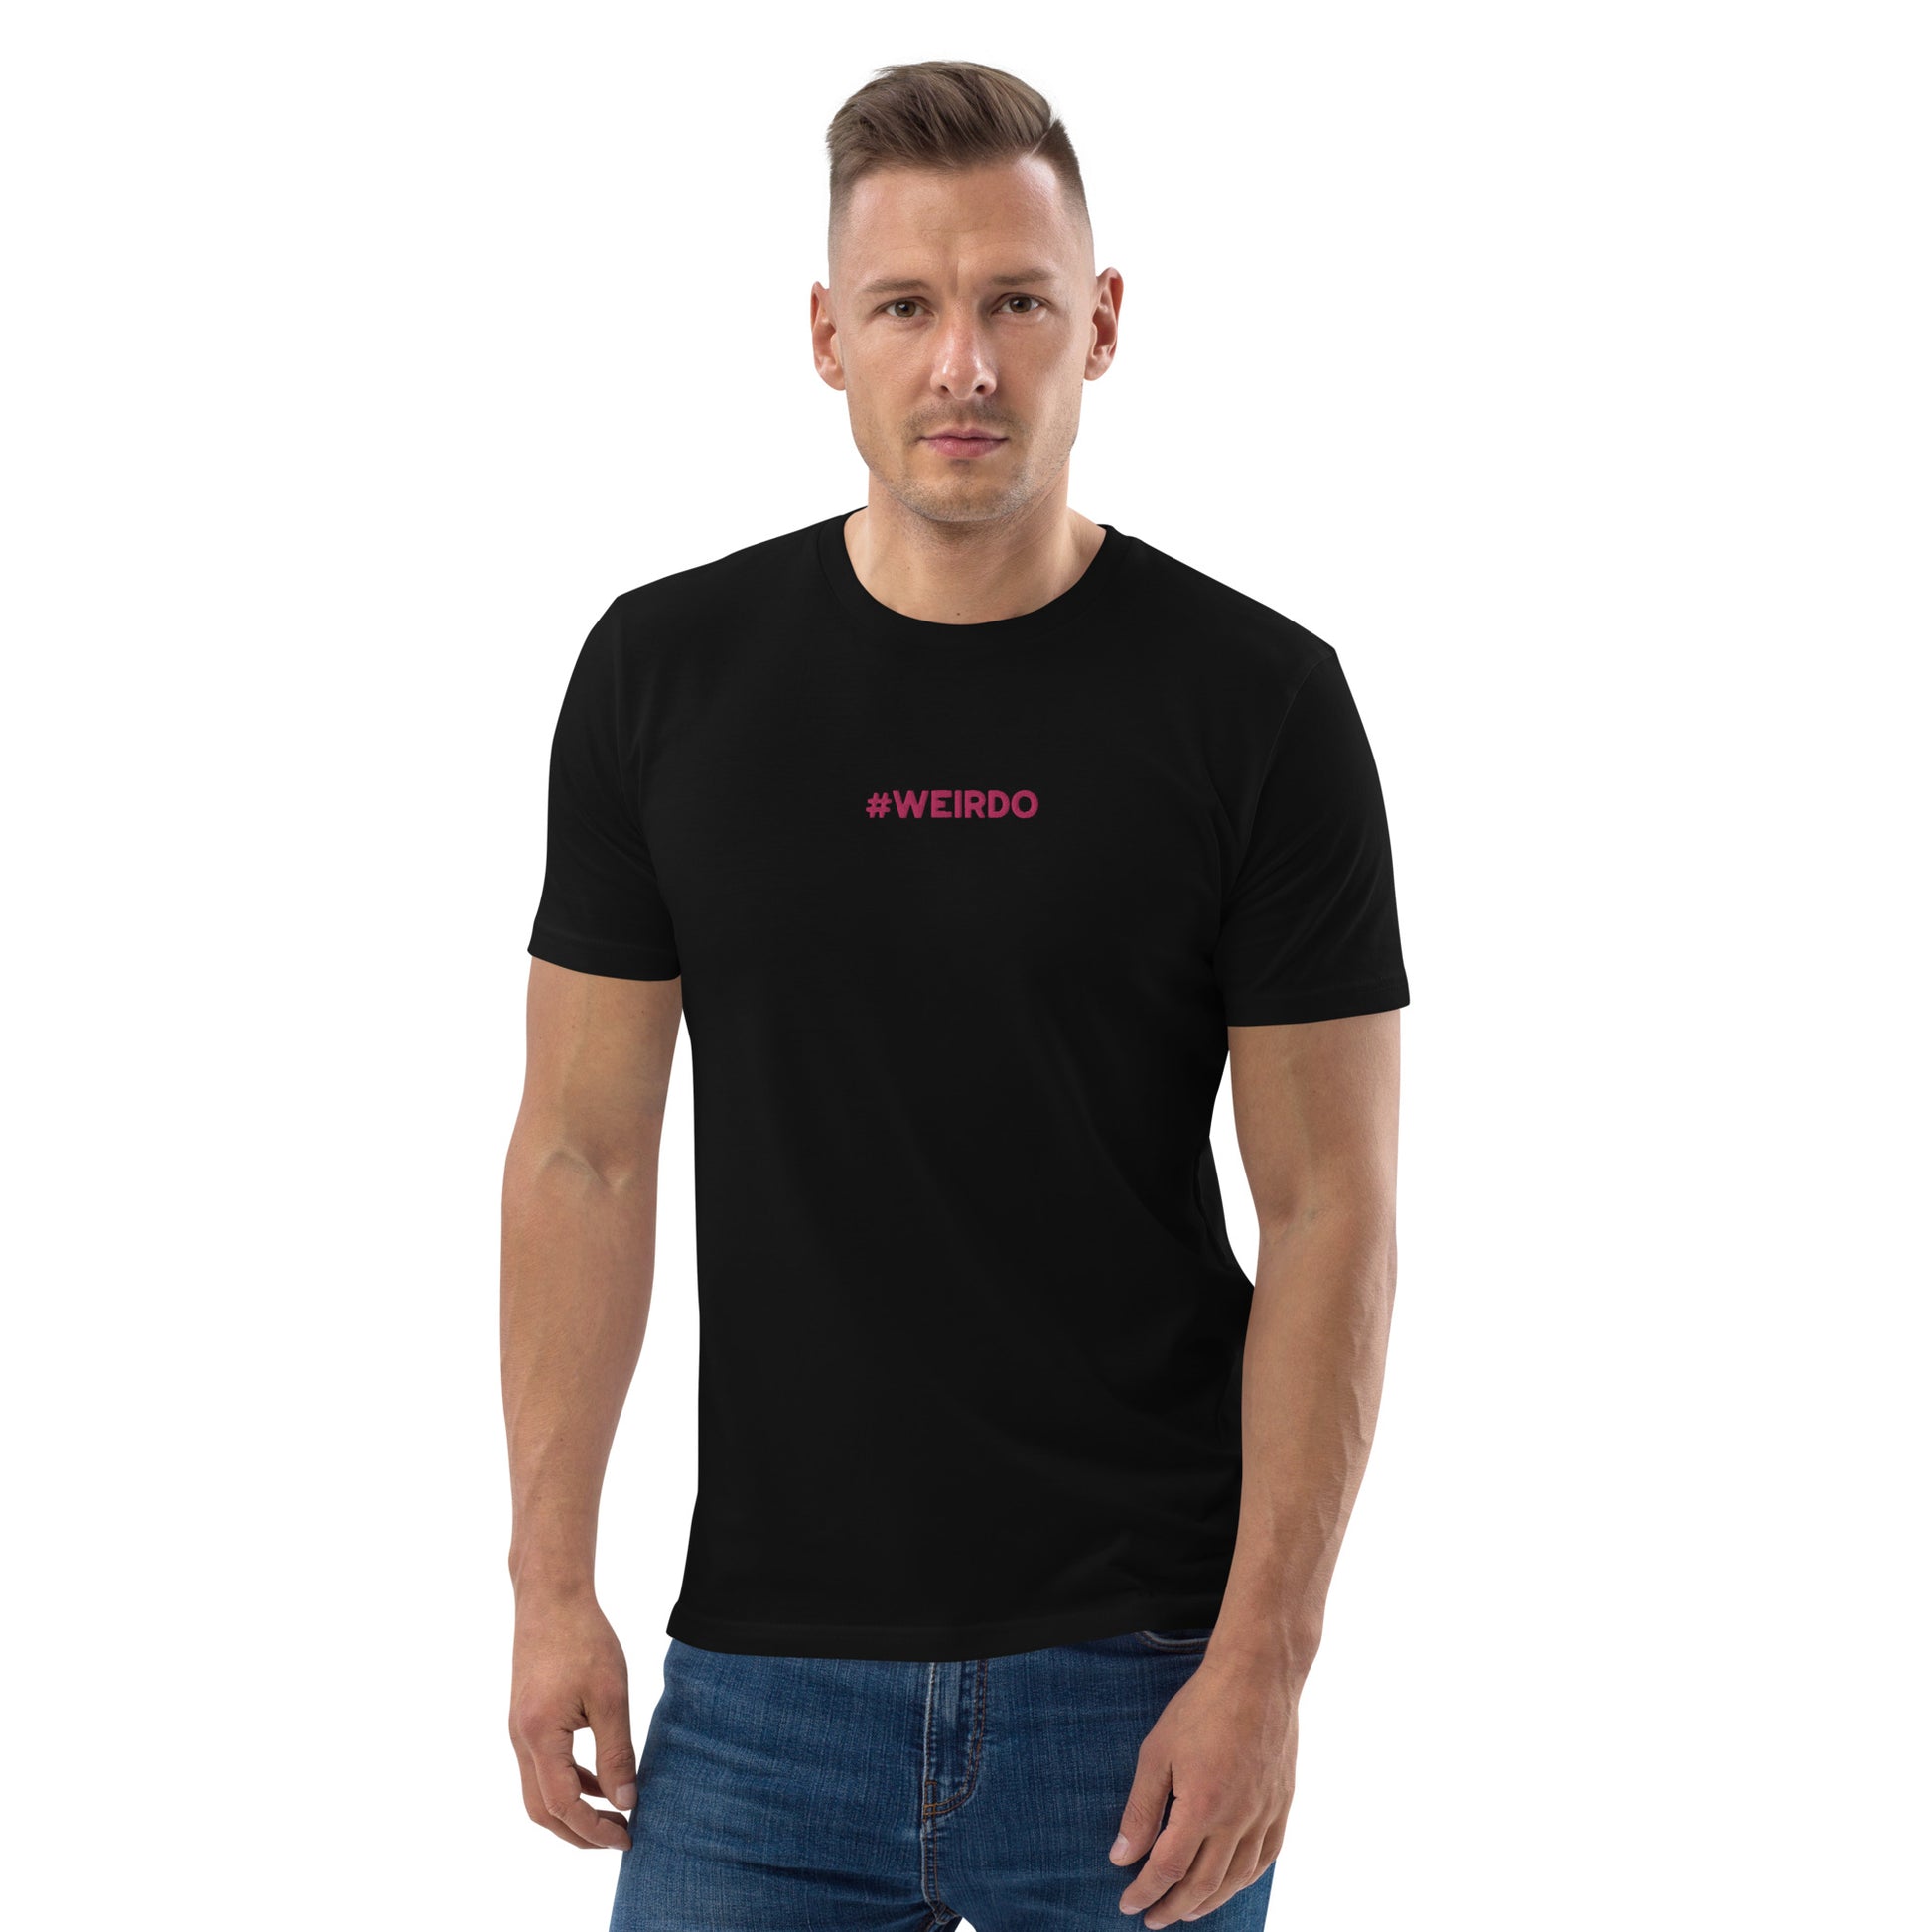 #WEIRDO meme is embroidered at the front of the t shirt. The color pink is used for this which gives a nice contrast with the black t shirt for men. Welcome to the funny t shirt company!